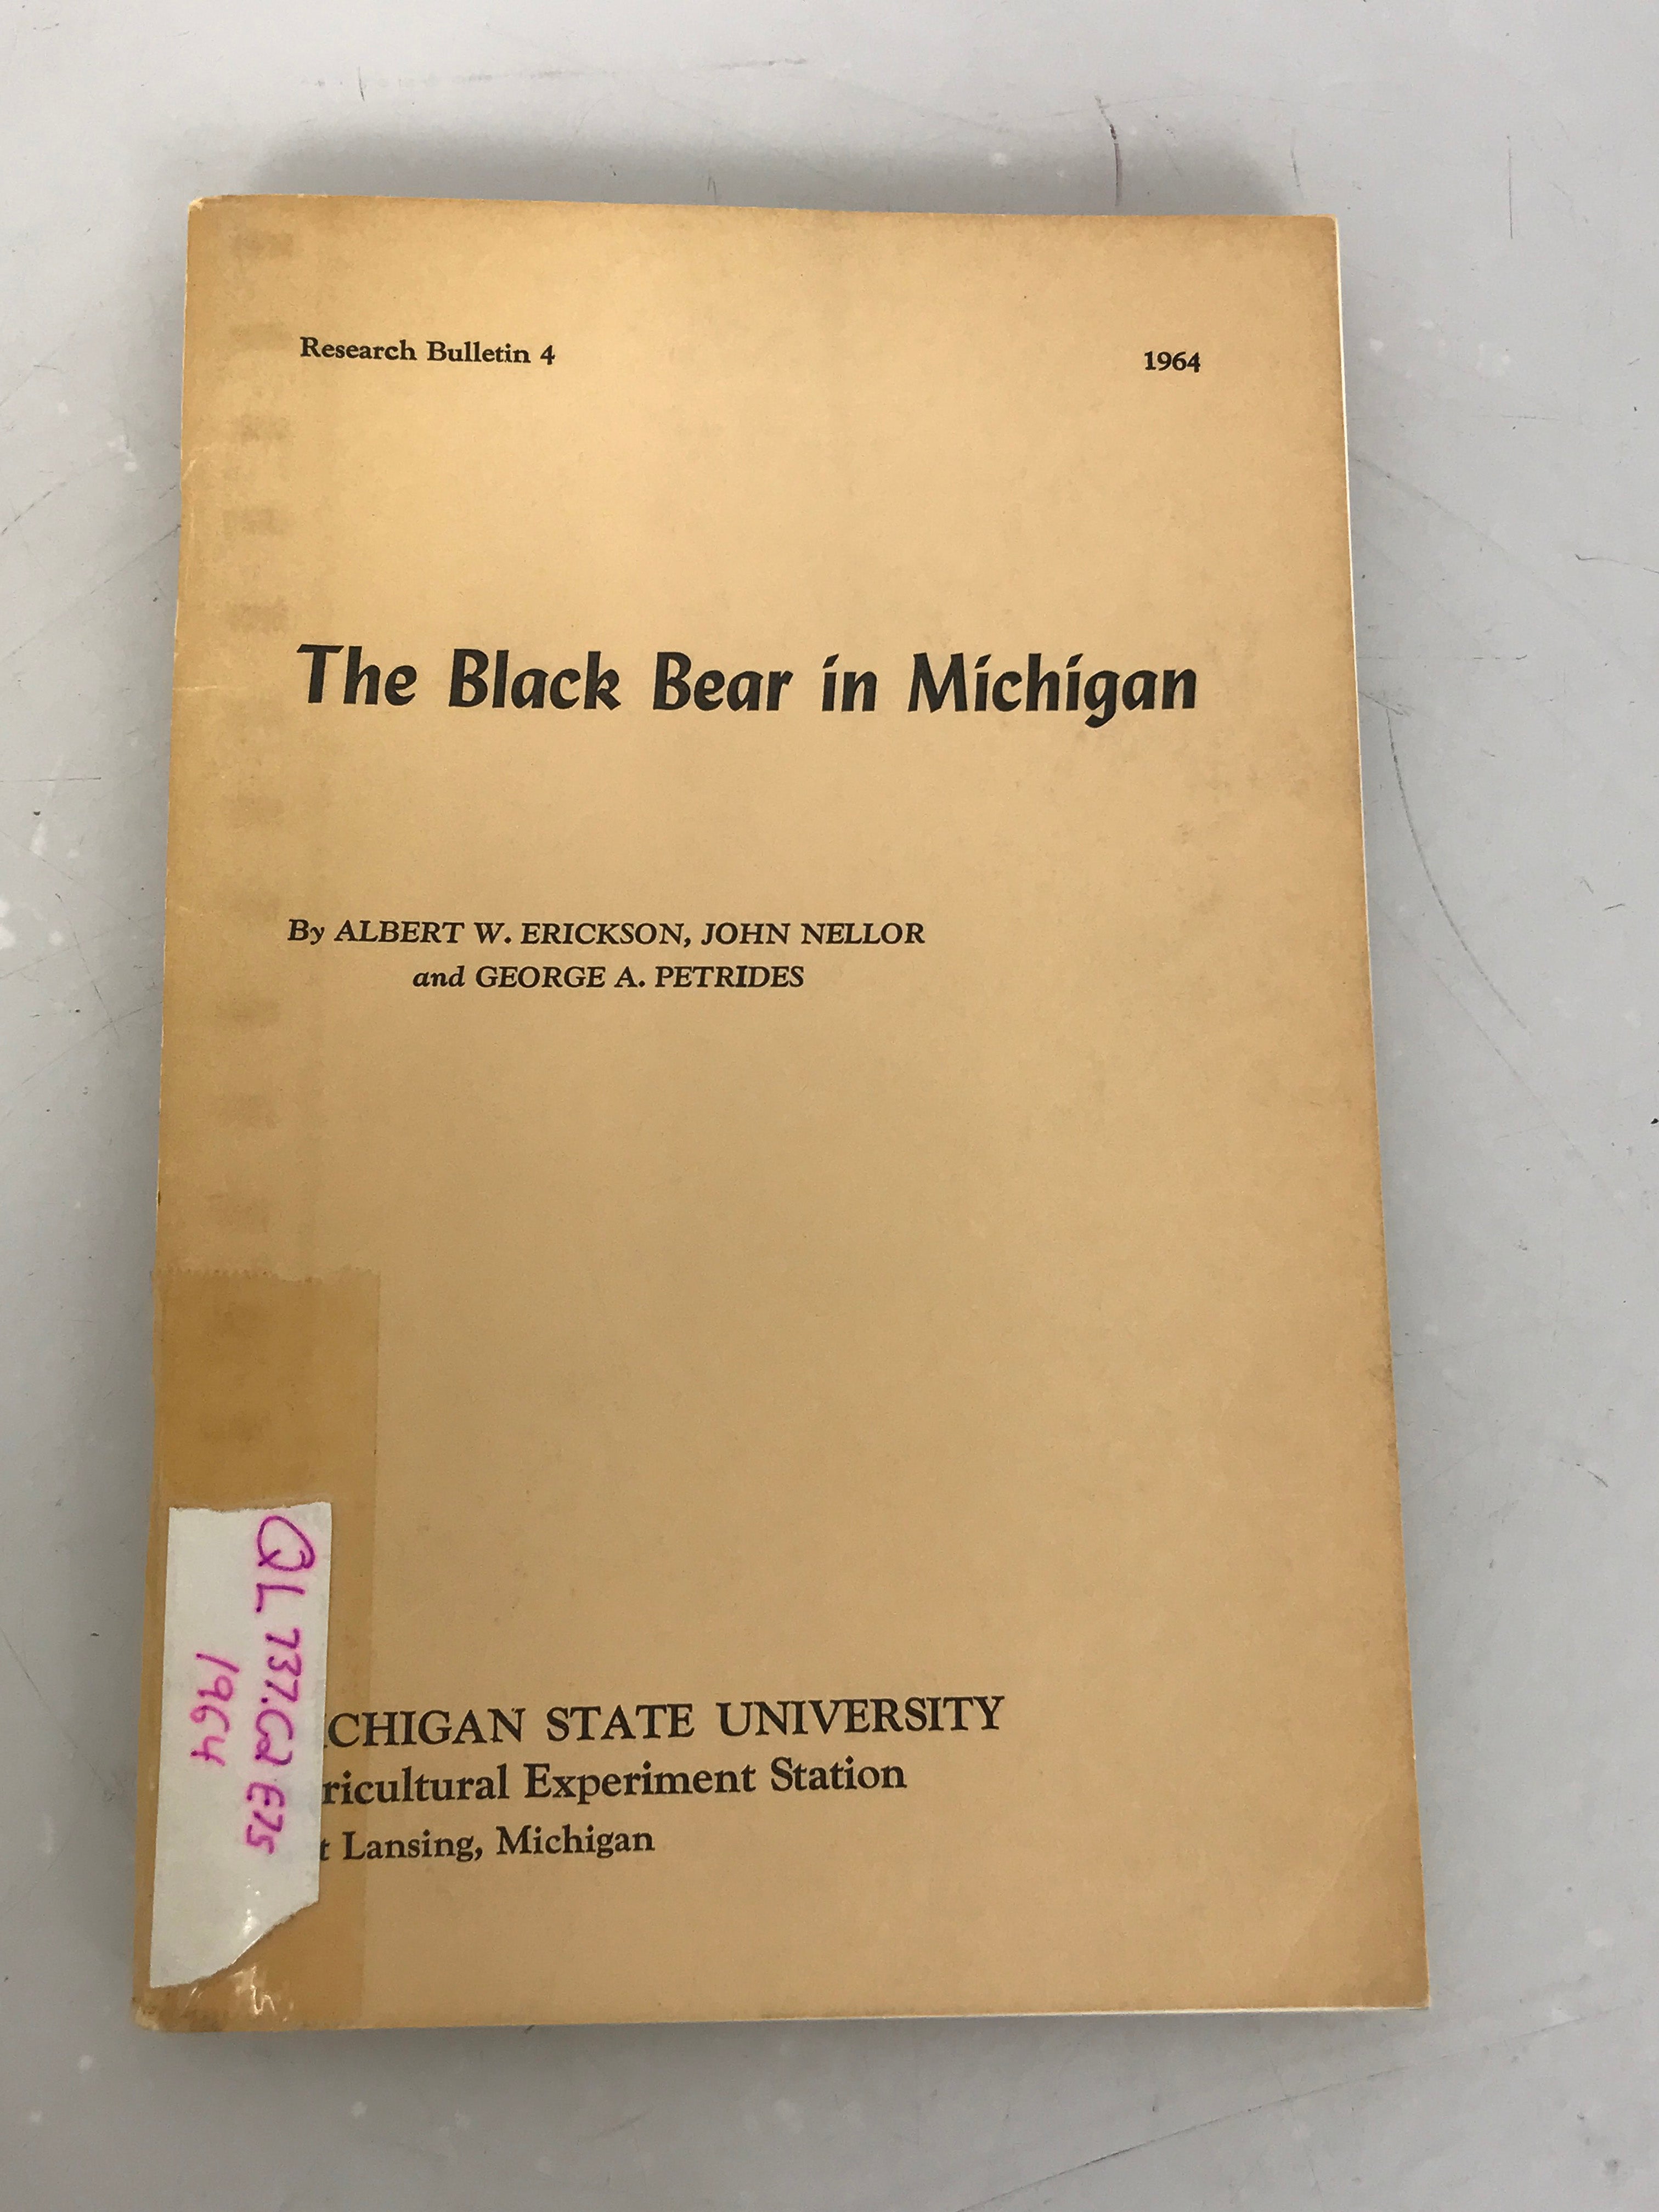 The Black Bear in Michigan by Erickson, Nellor, and Petrides 1964 SC